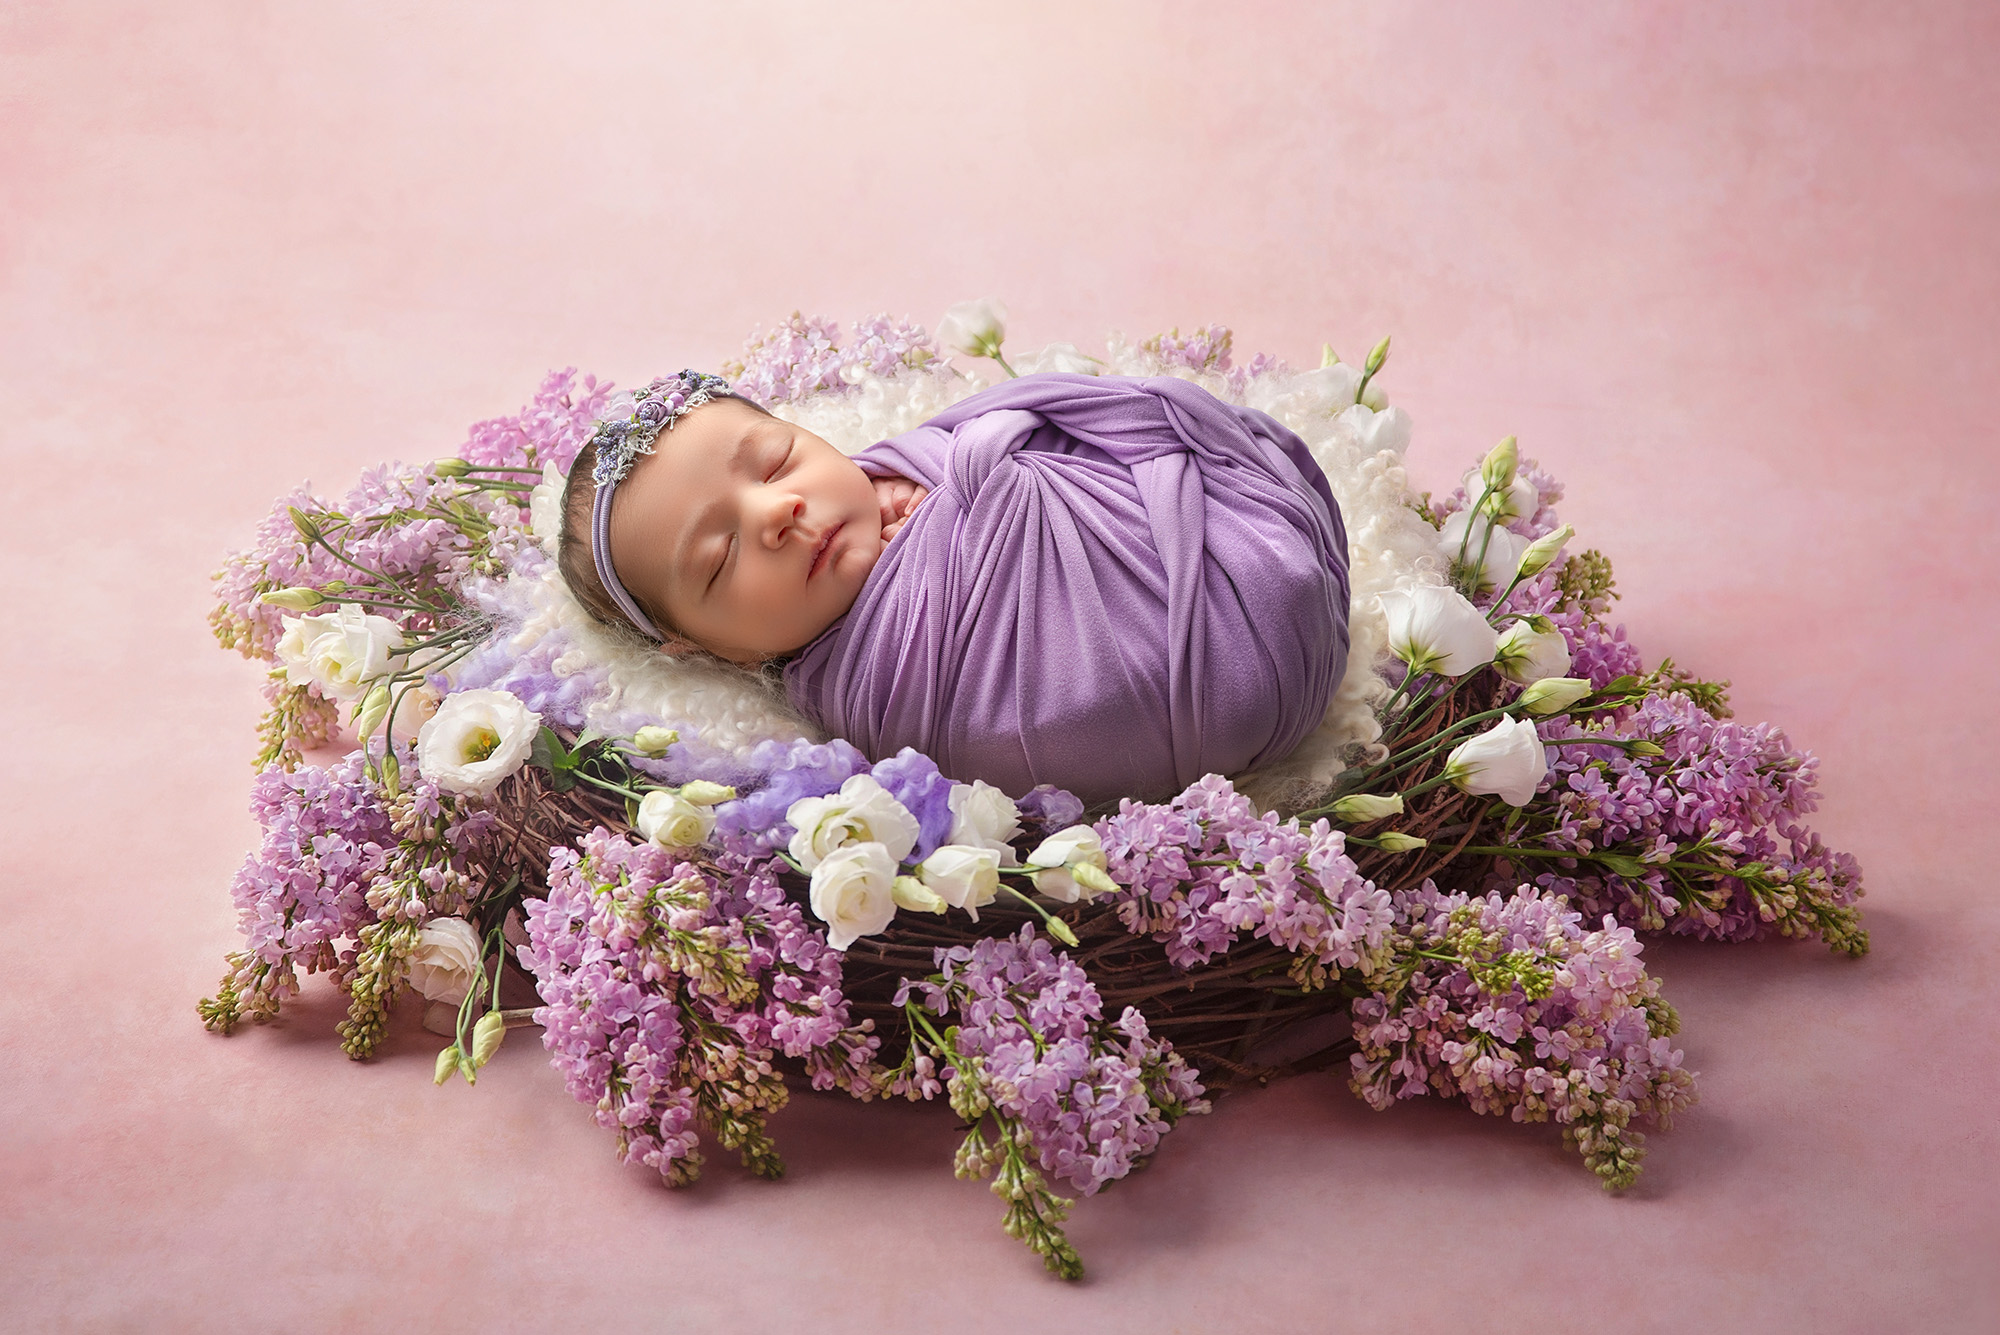 baby girl wrapped in purple surrounded by purple and white florals on a pink background